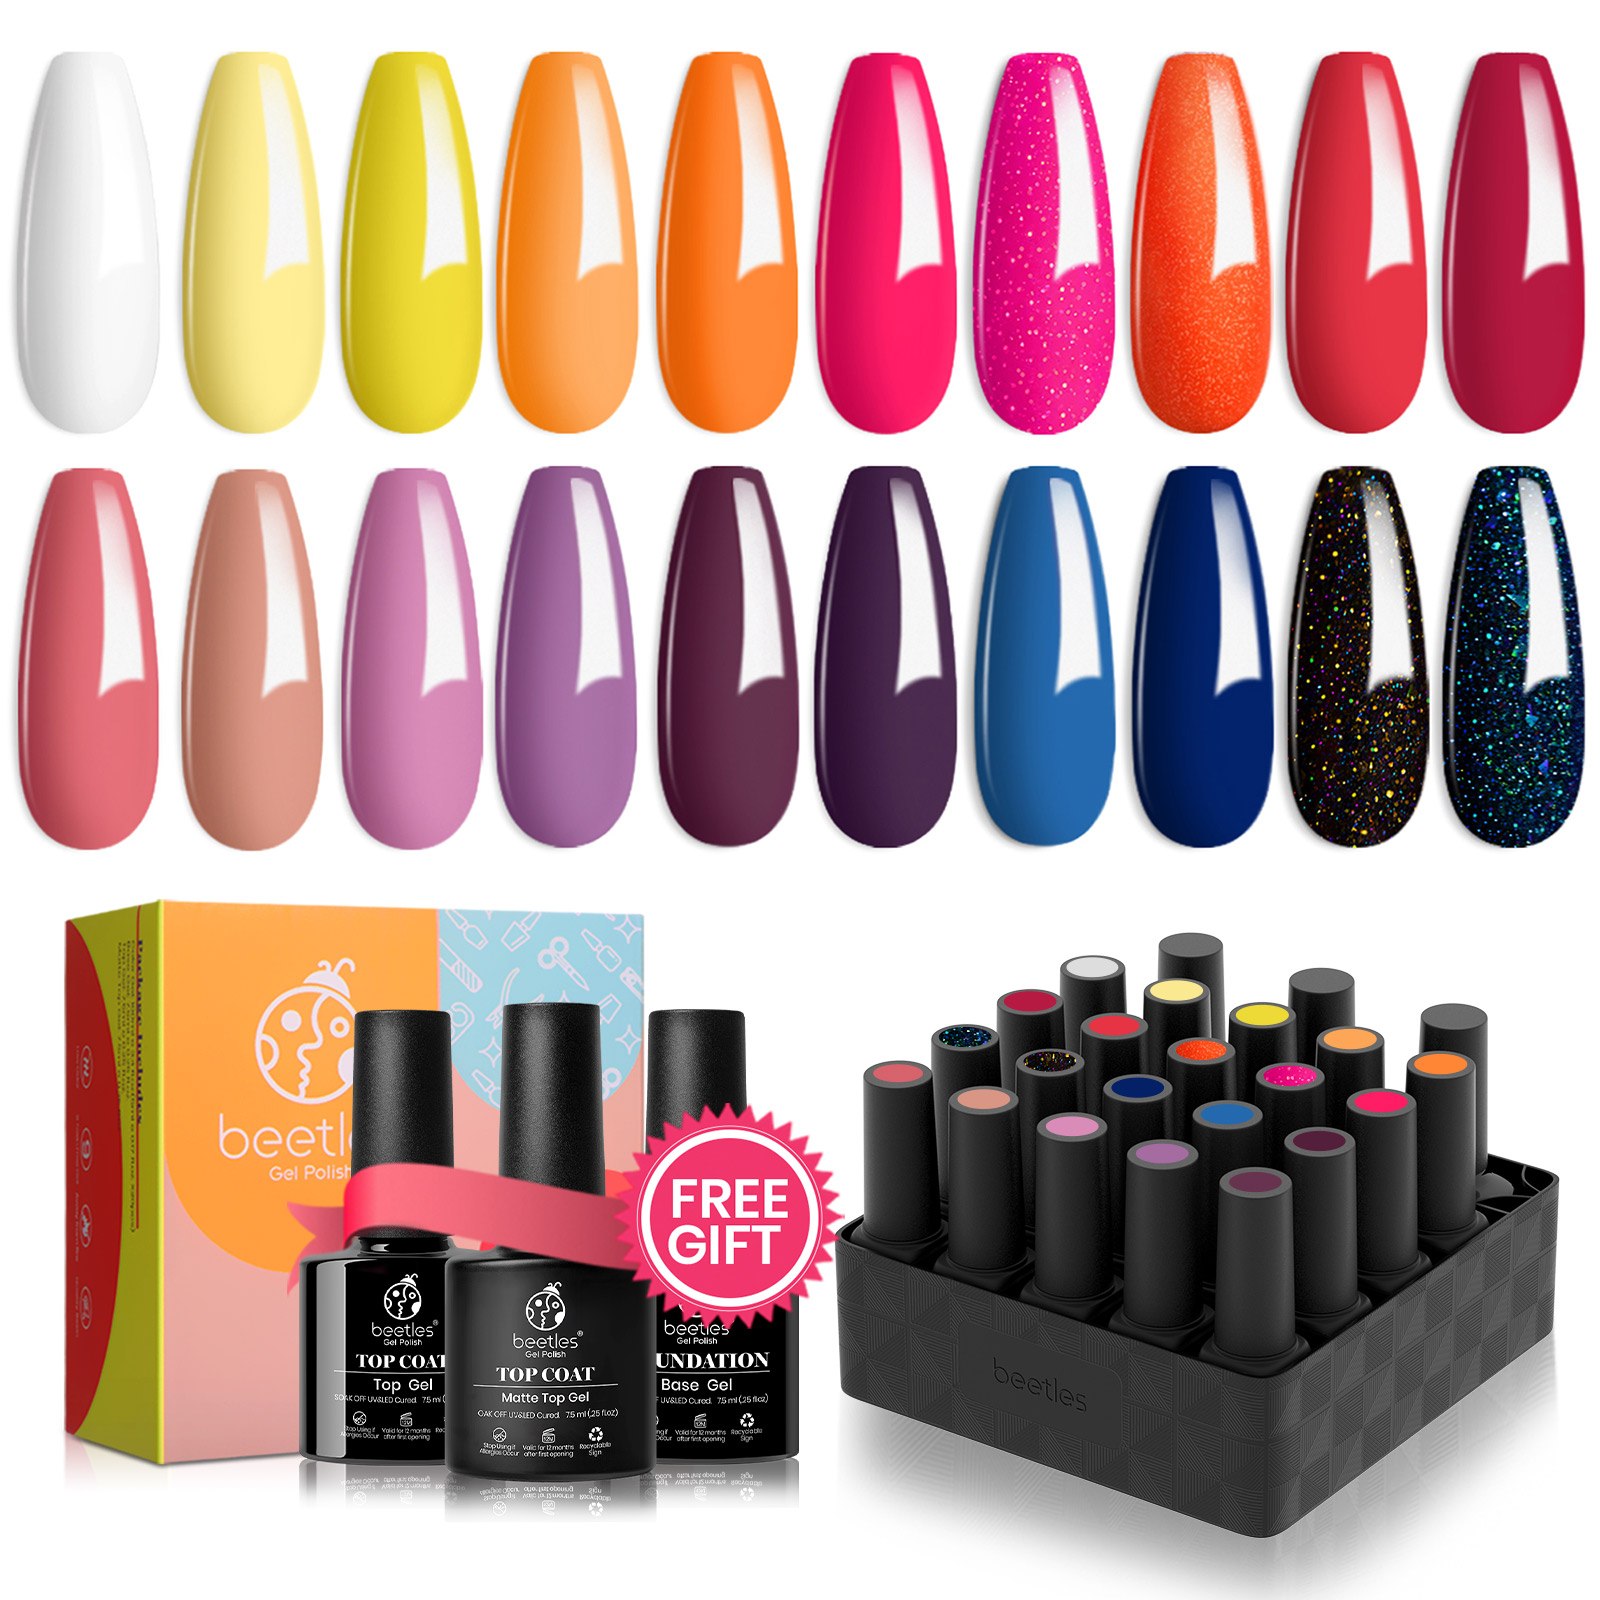 Sunset Soiree - 20 Gel Colors Set with Top and Base Coat (5ml/Each)